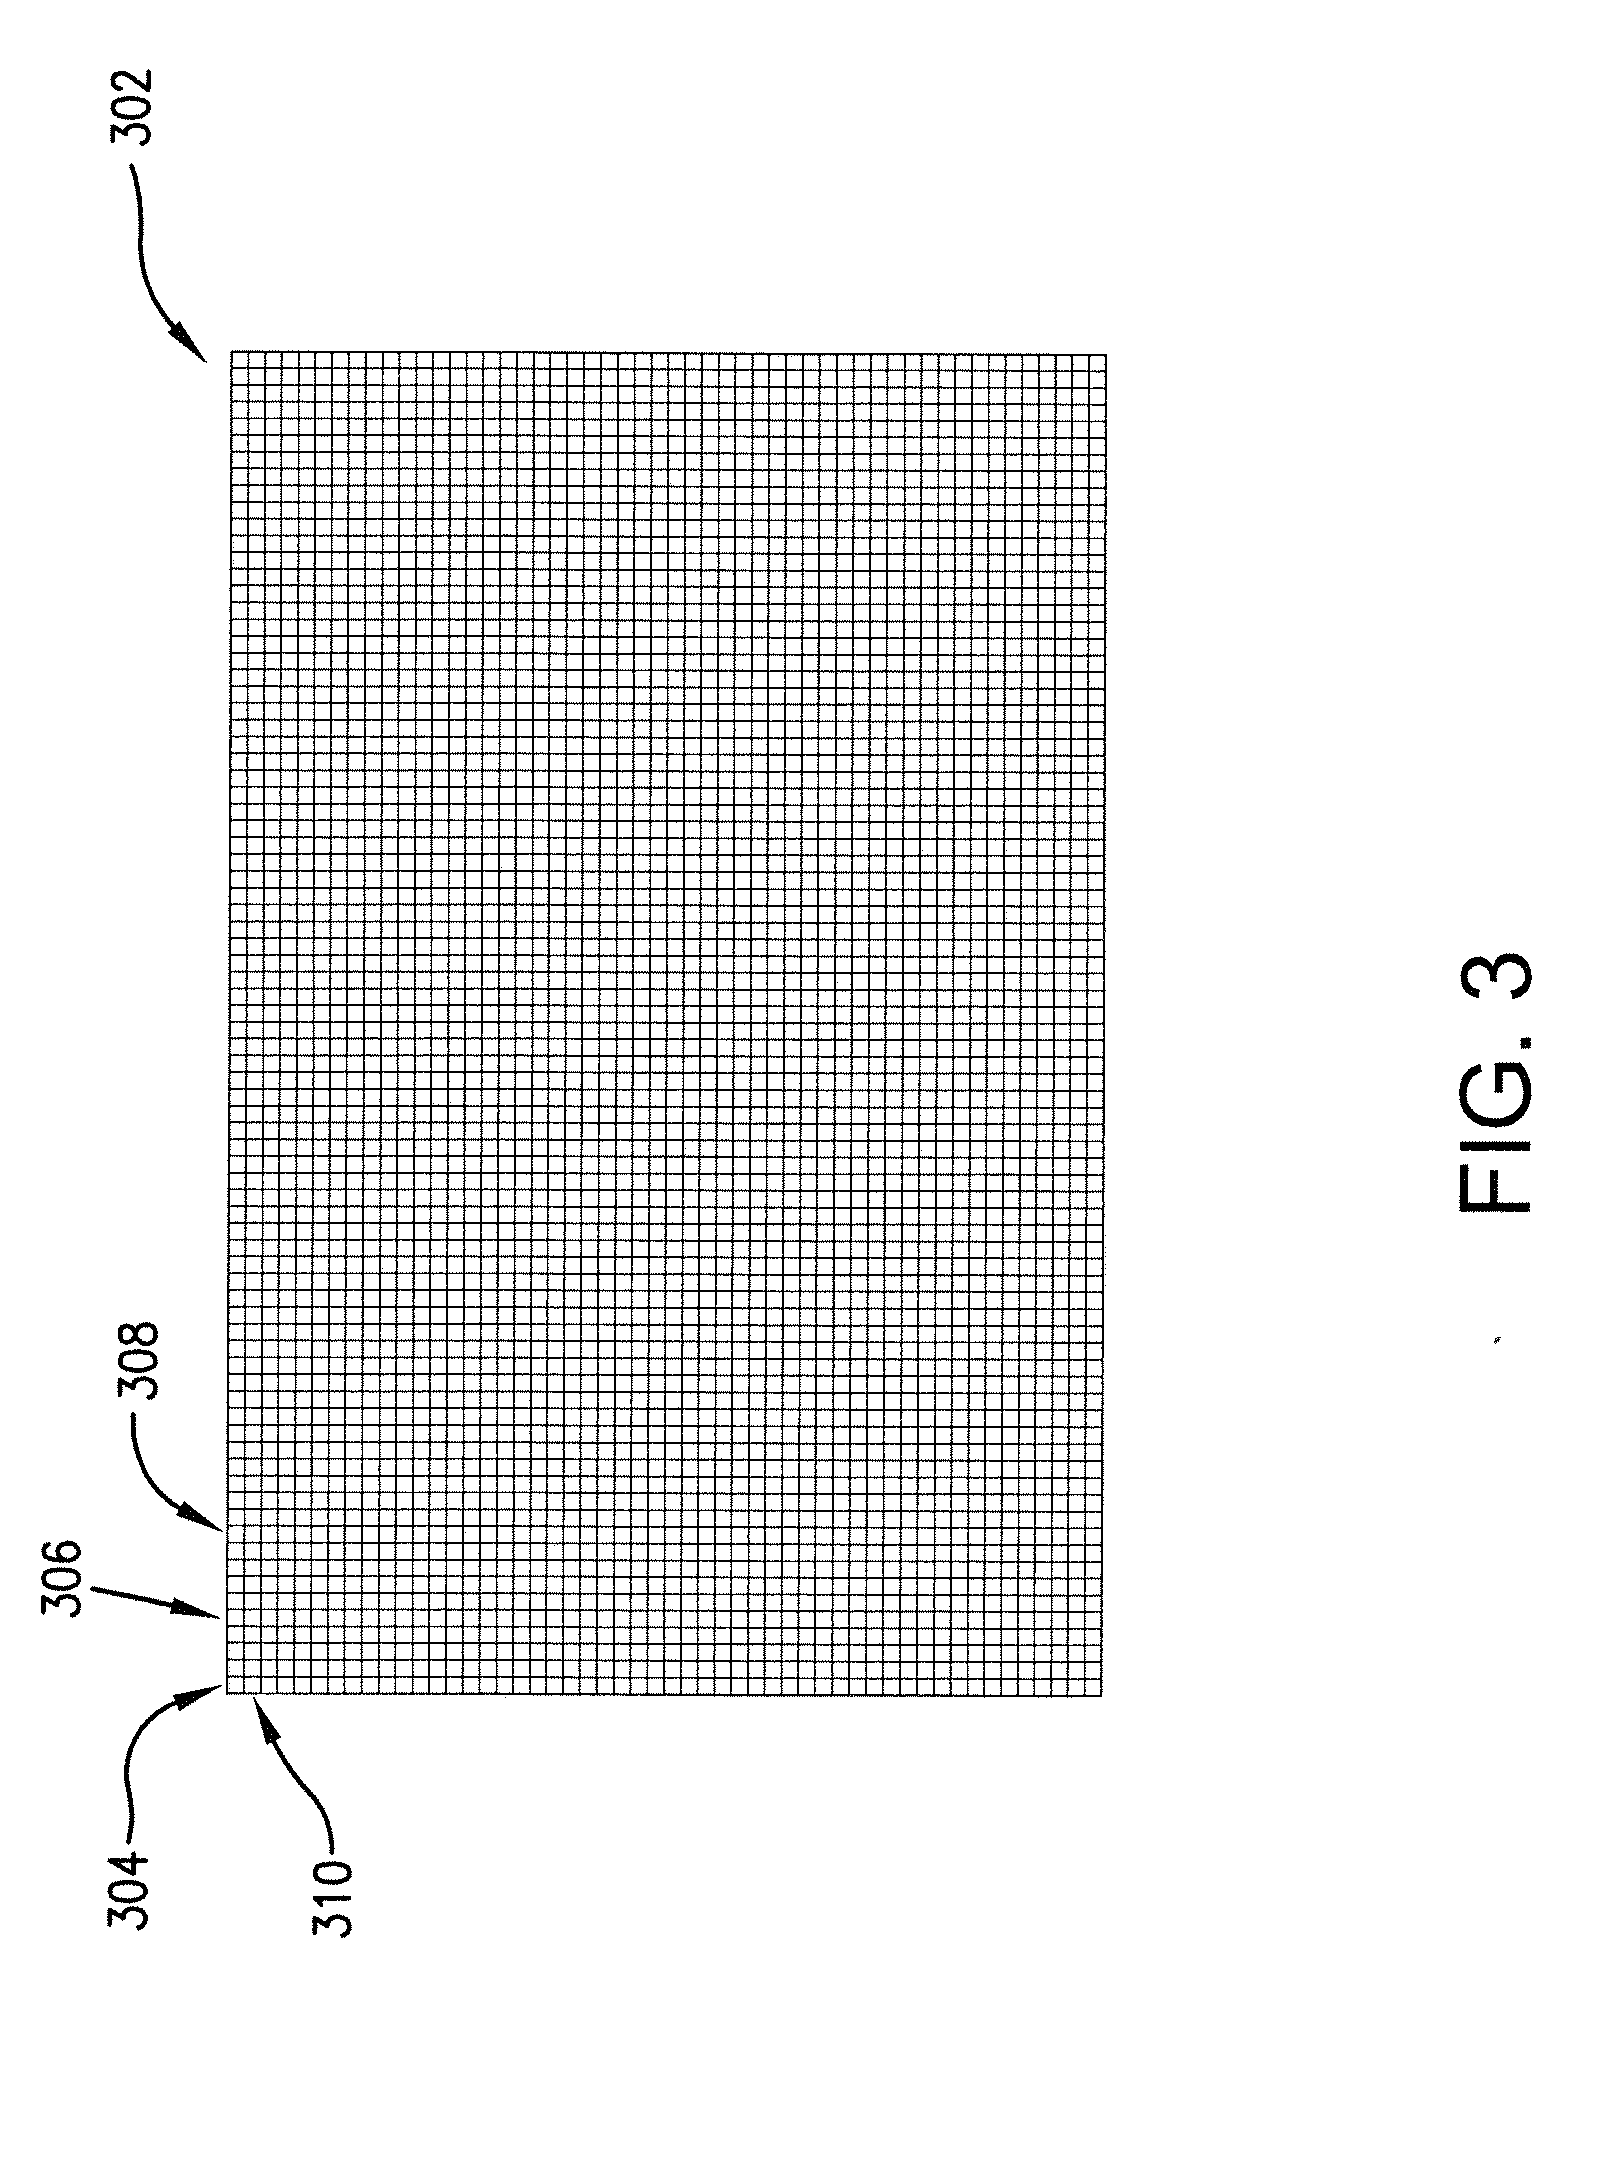 Camera, computer program and method for measuring thermal radiation and thermal rates of change